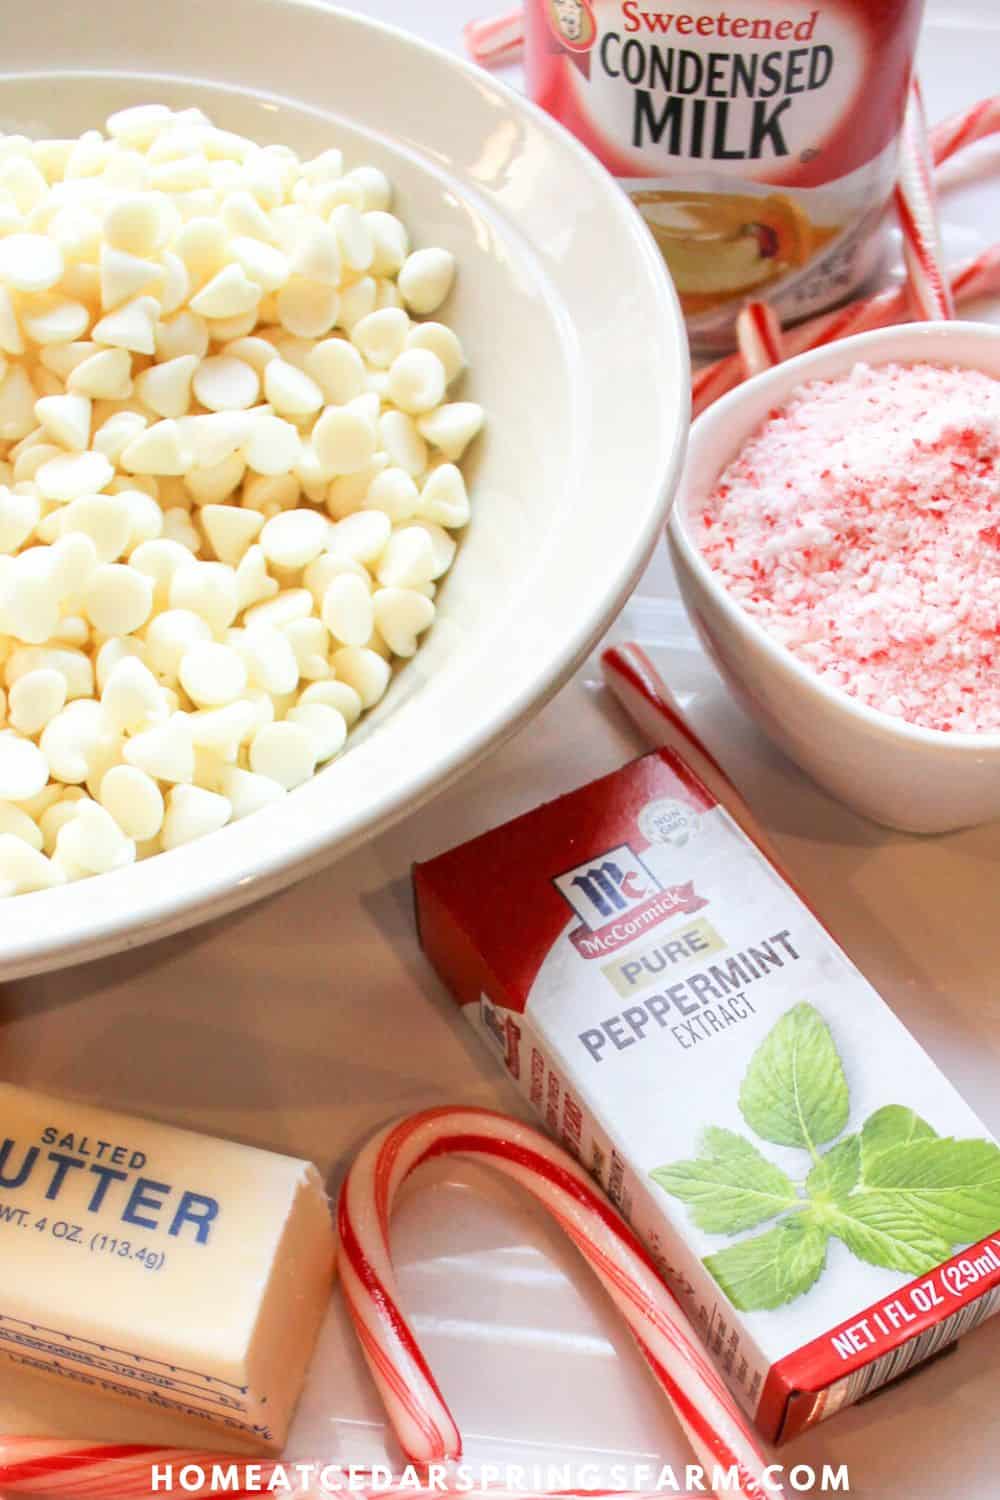 Ingredients shown for Peppermint Fudge.